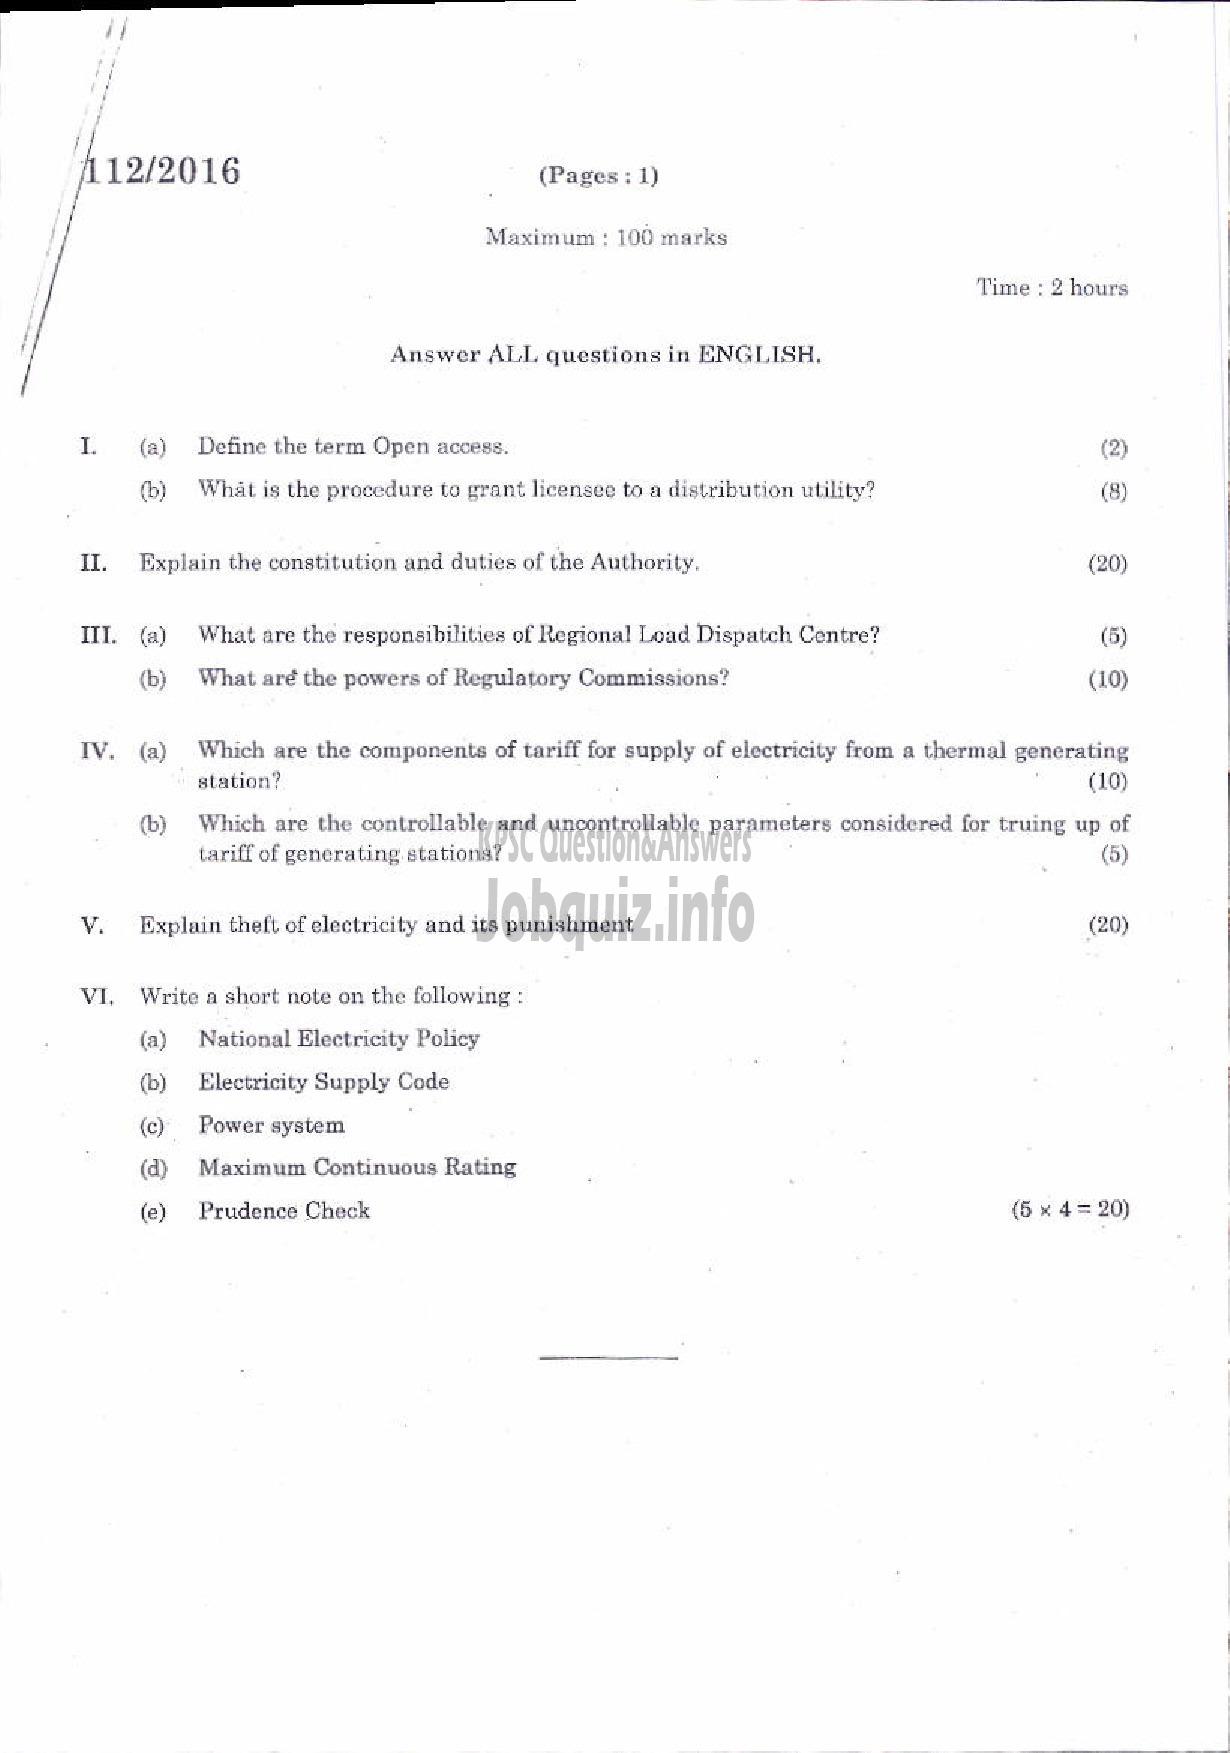 Kerala PSC Question Paper - DIVISIONAL ACCOUNTANT KSEB PAPER III ELECTRICITY RULES-1